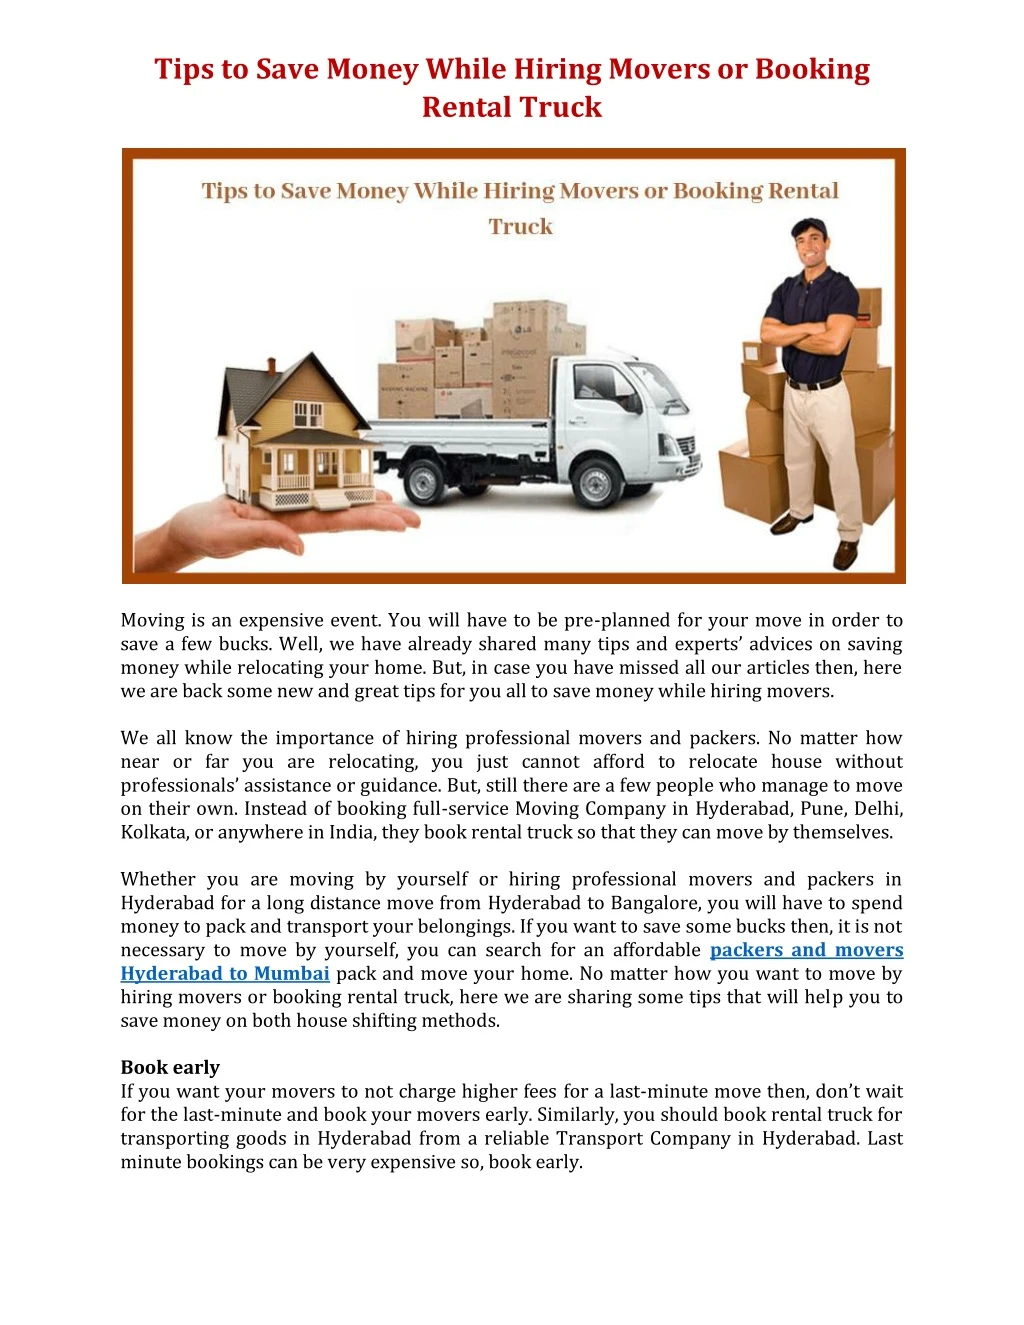 tips to save money while hiring movers or booking